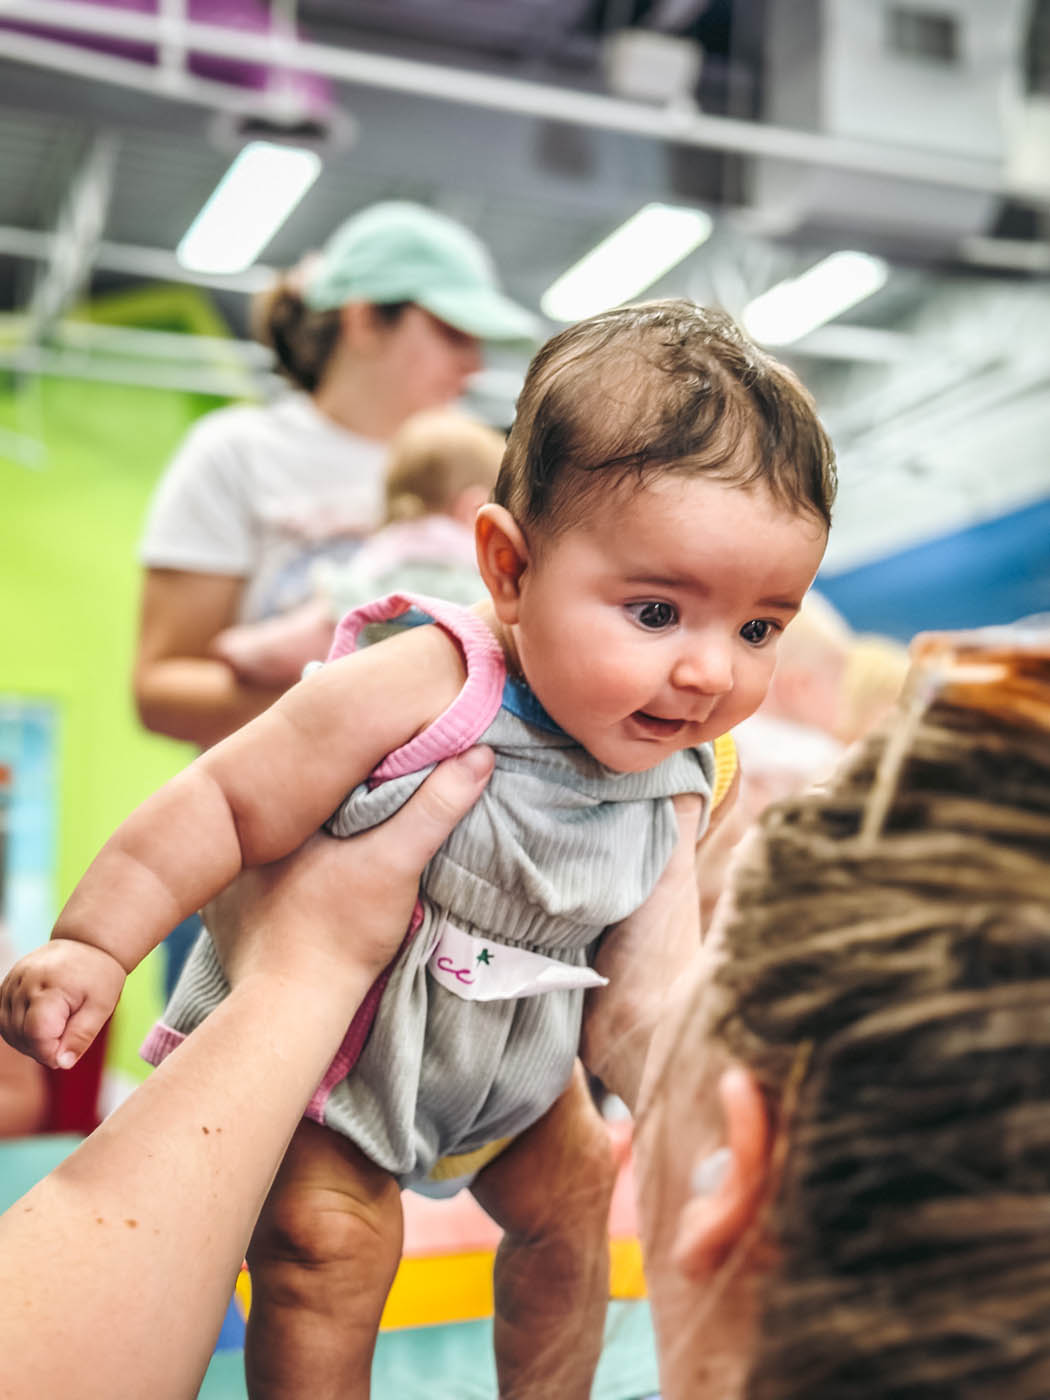 A baby being held in the air at Romp n' Roll Willow Grove's classes for babies in Willow Grove, PA